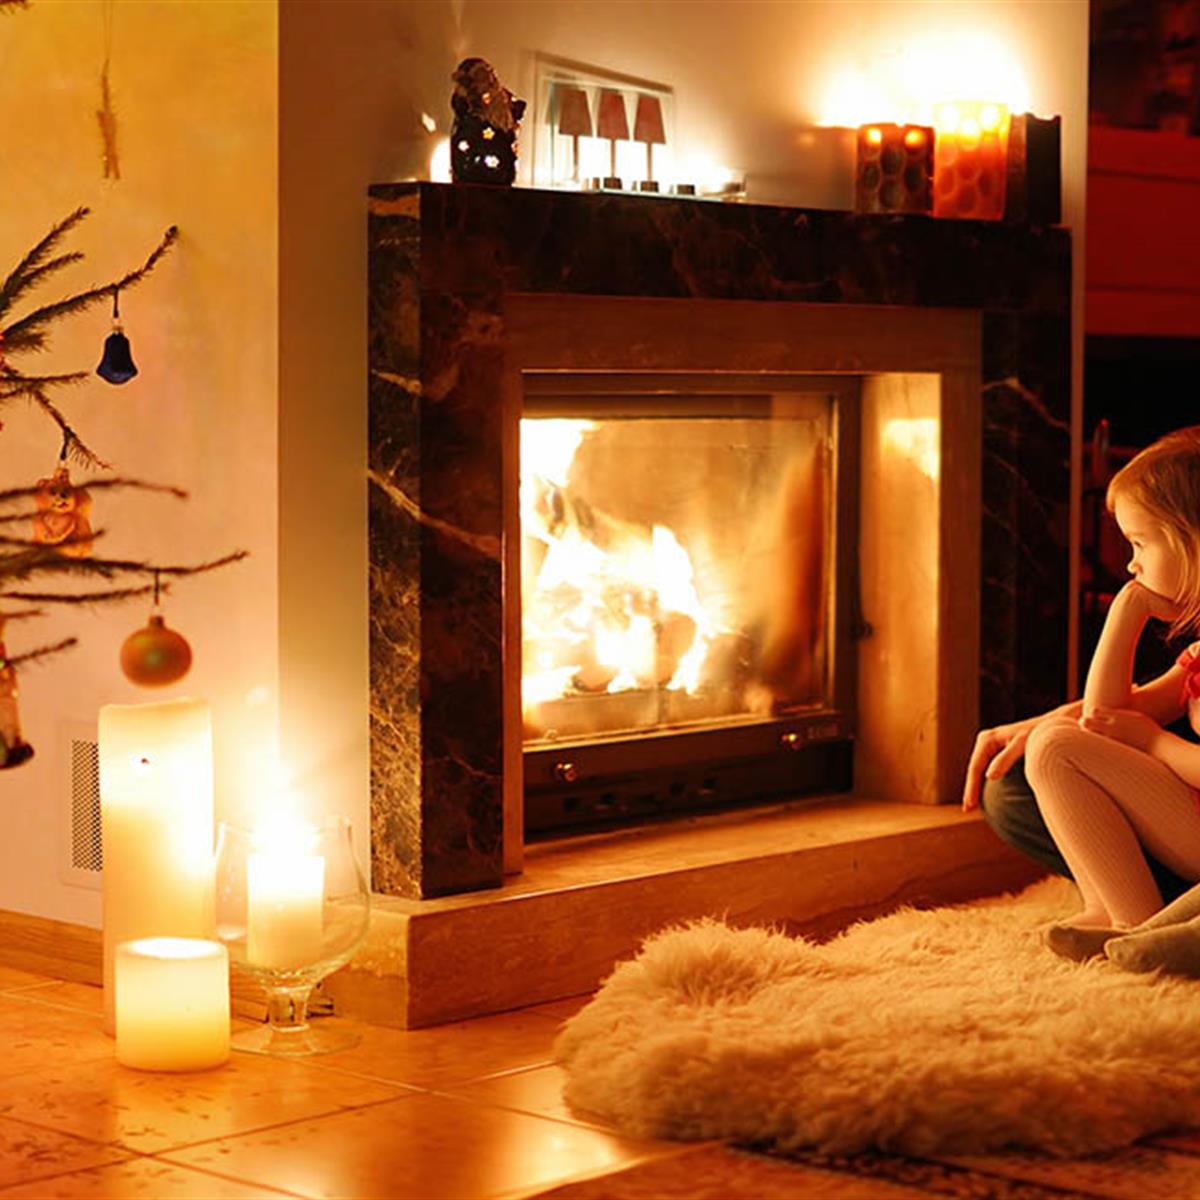 Fireplace Safety Tips for Families - HealthyChildren.org